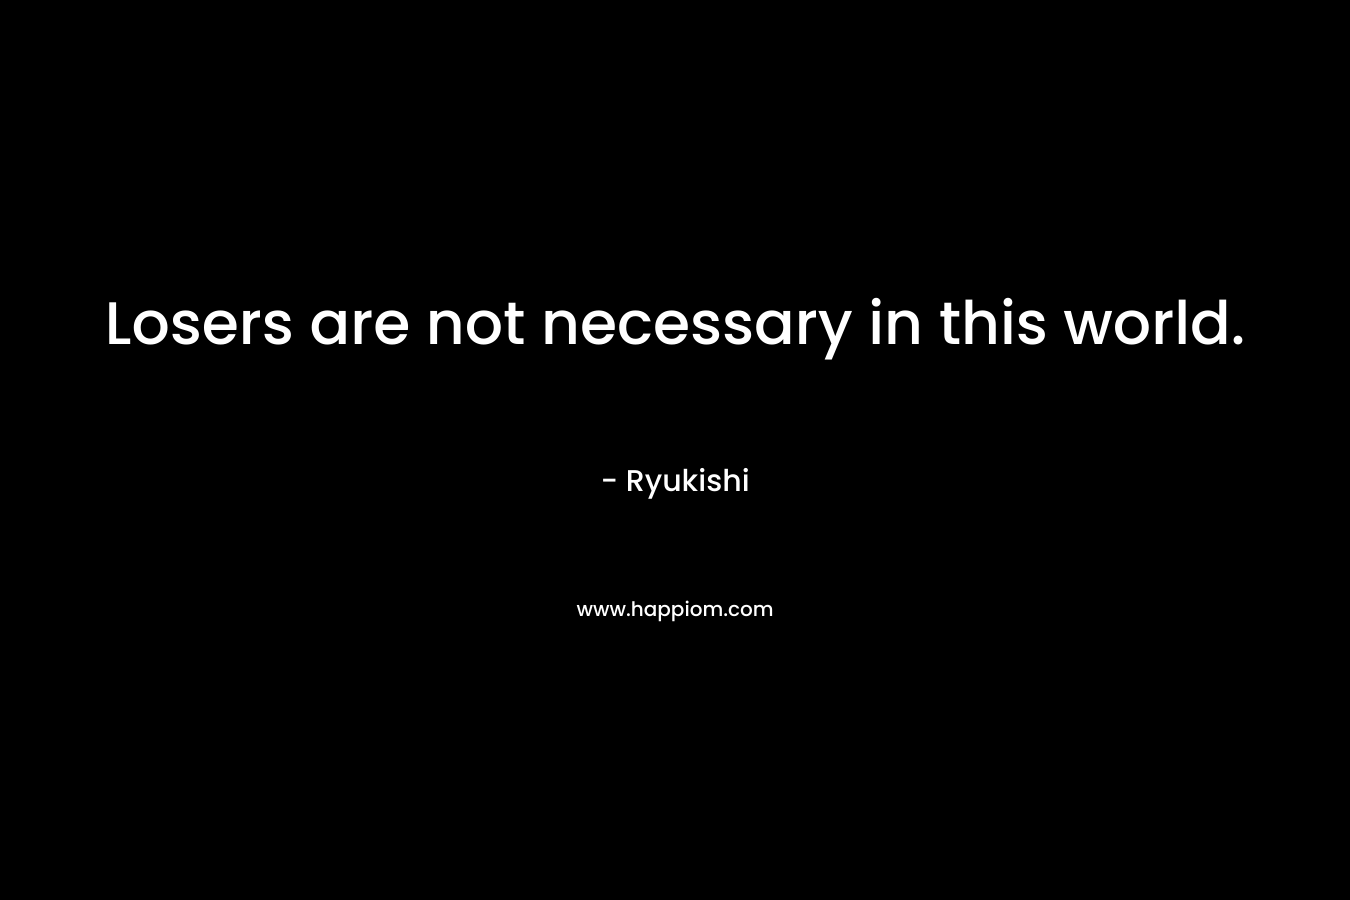 Losers are not necessary in this world. – Ryukishi